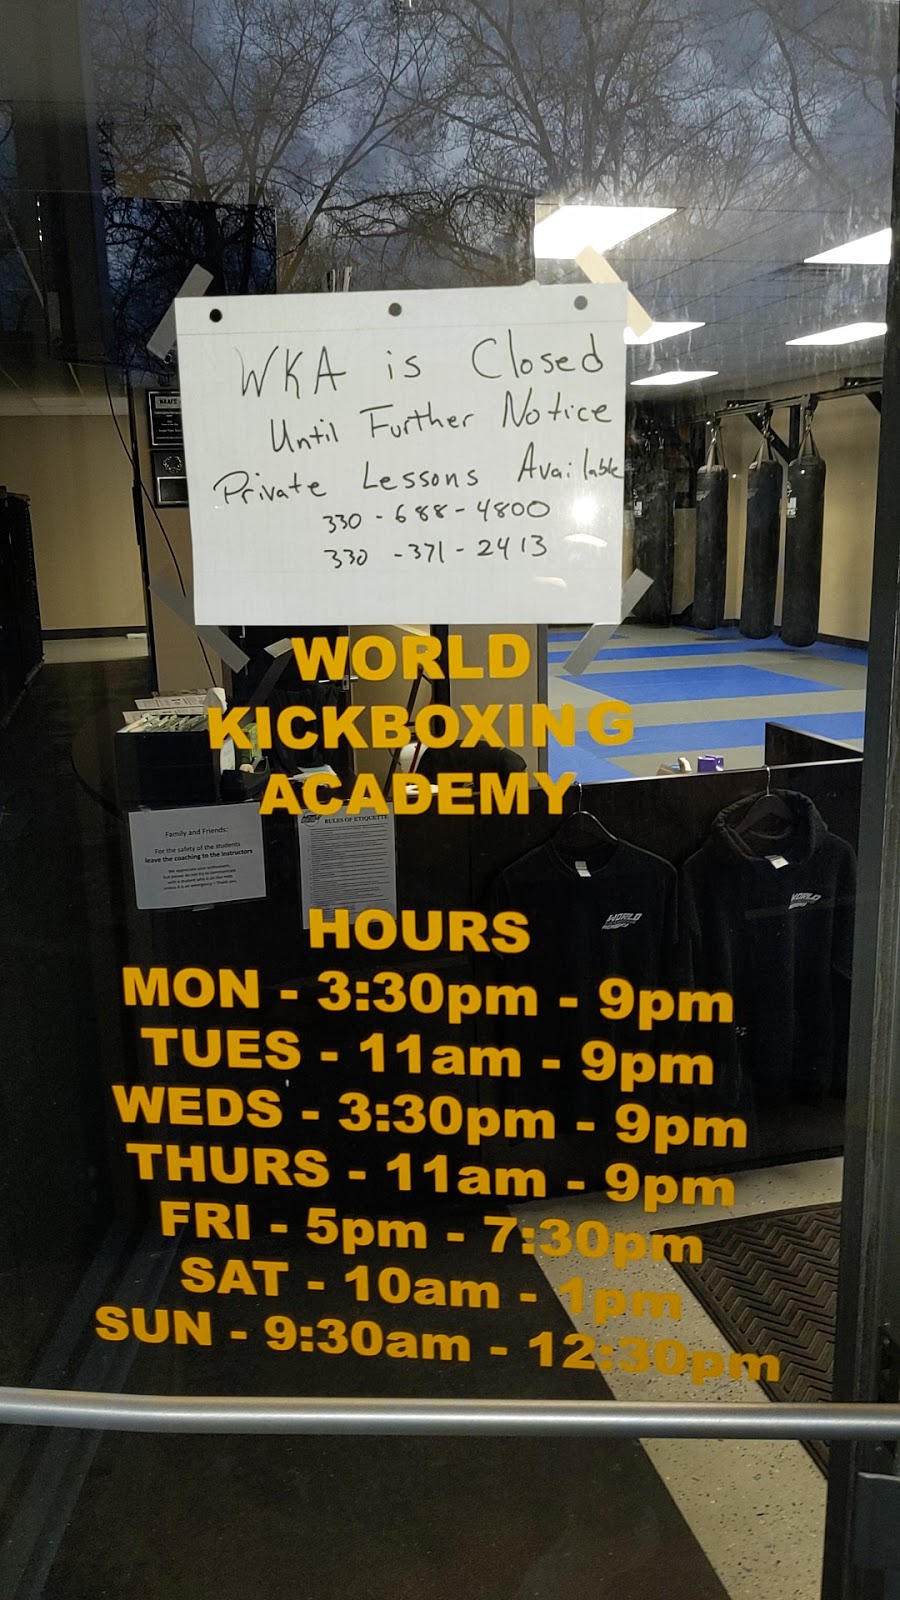 World Kickboxing Academy | 2413 State Rd, Cuyahoga Falls, OH 44223 | Phone: (330) 688-4800